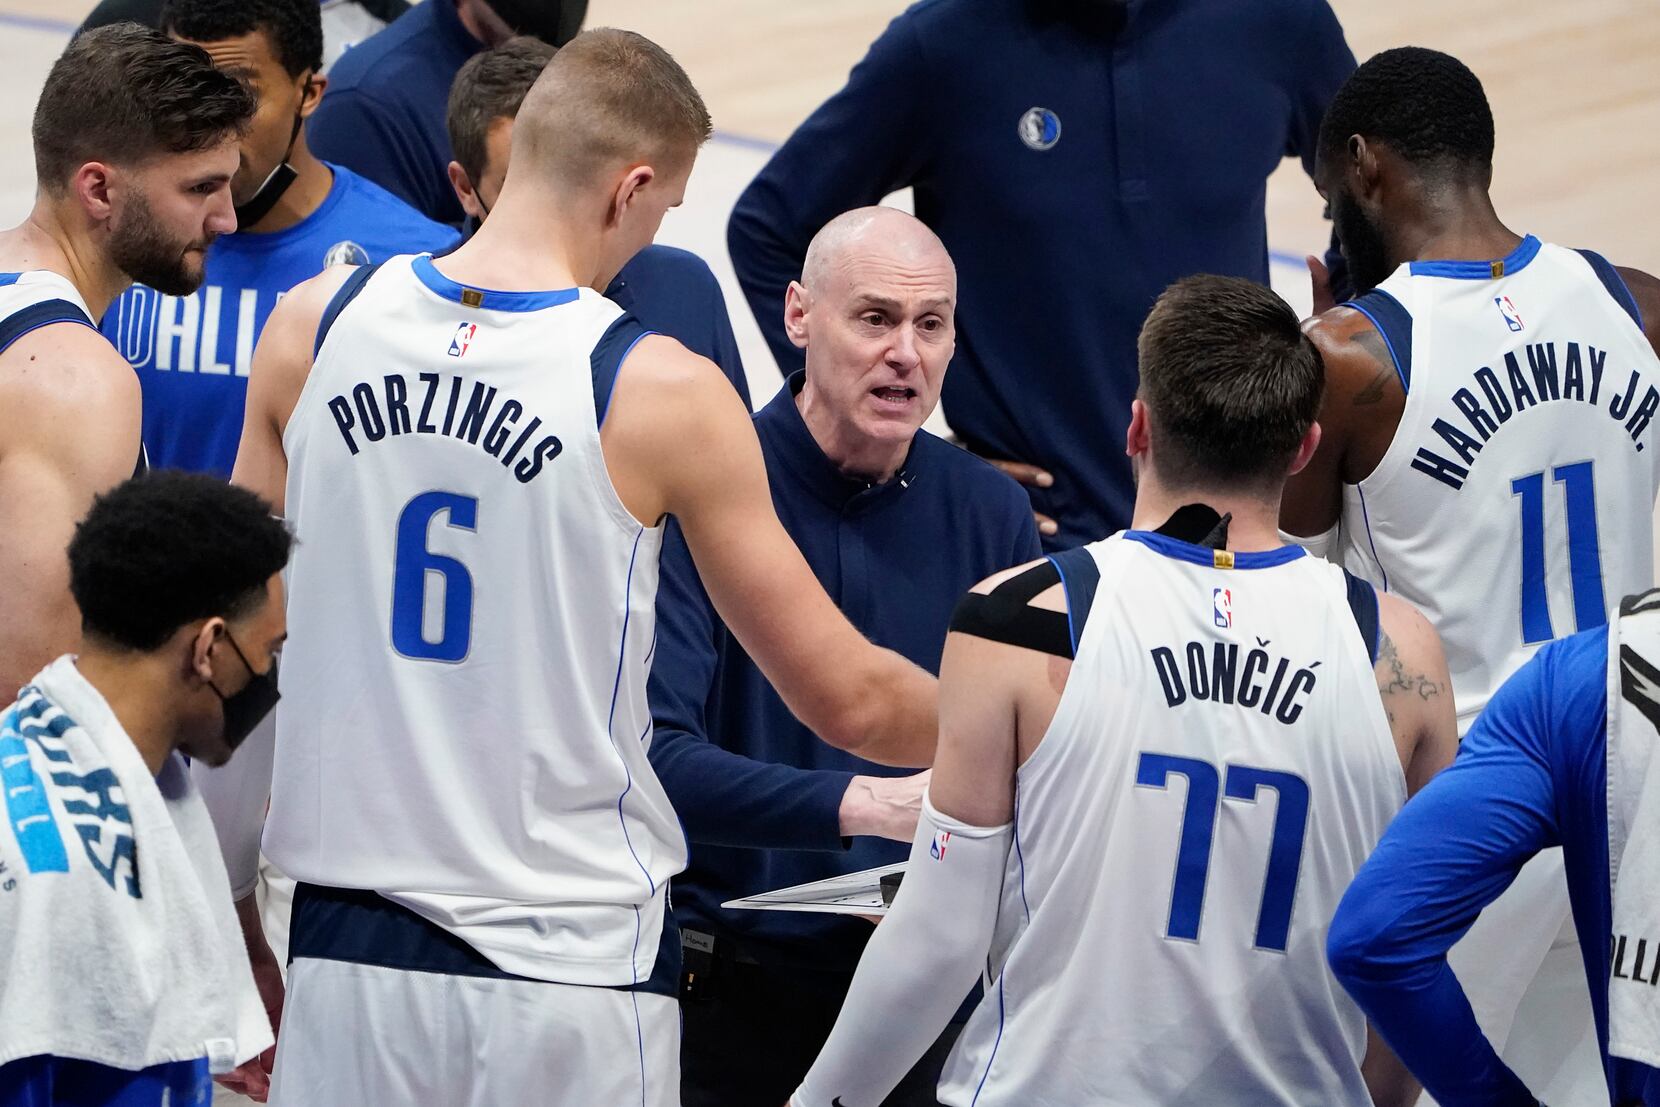 How Rajon Rondo's time with the Mavericks turned into a disaster